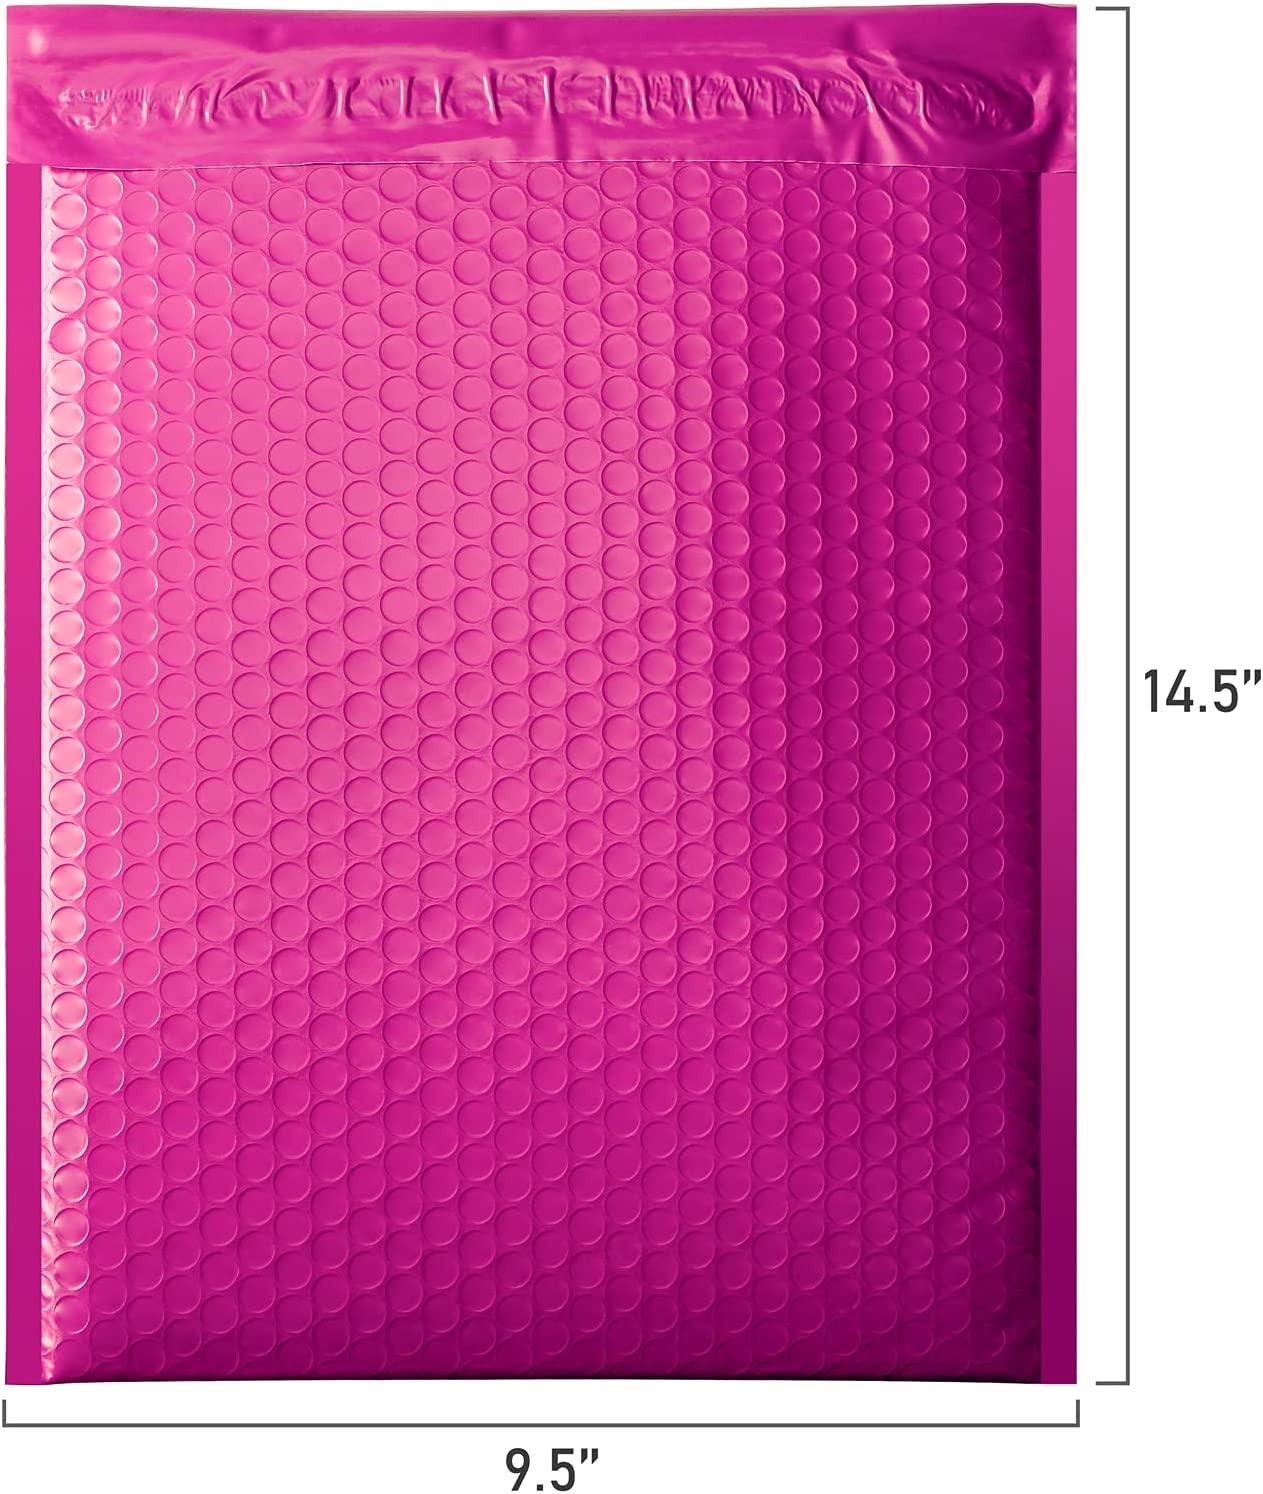 10.5x16 Bubble-Mailer Padded Envelope | Hot Pink